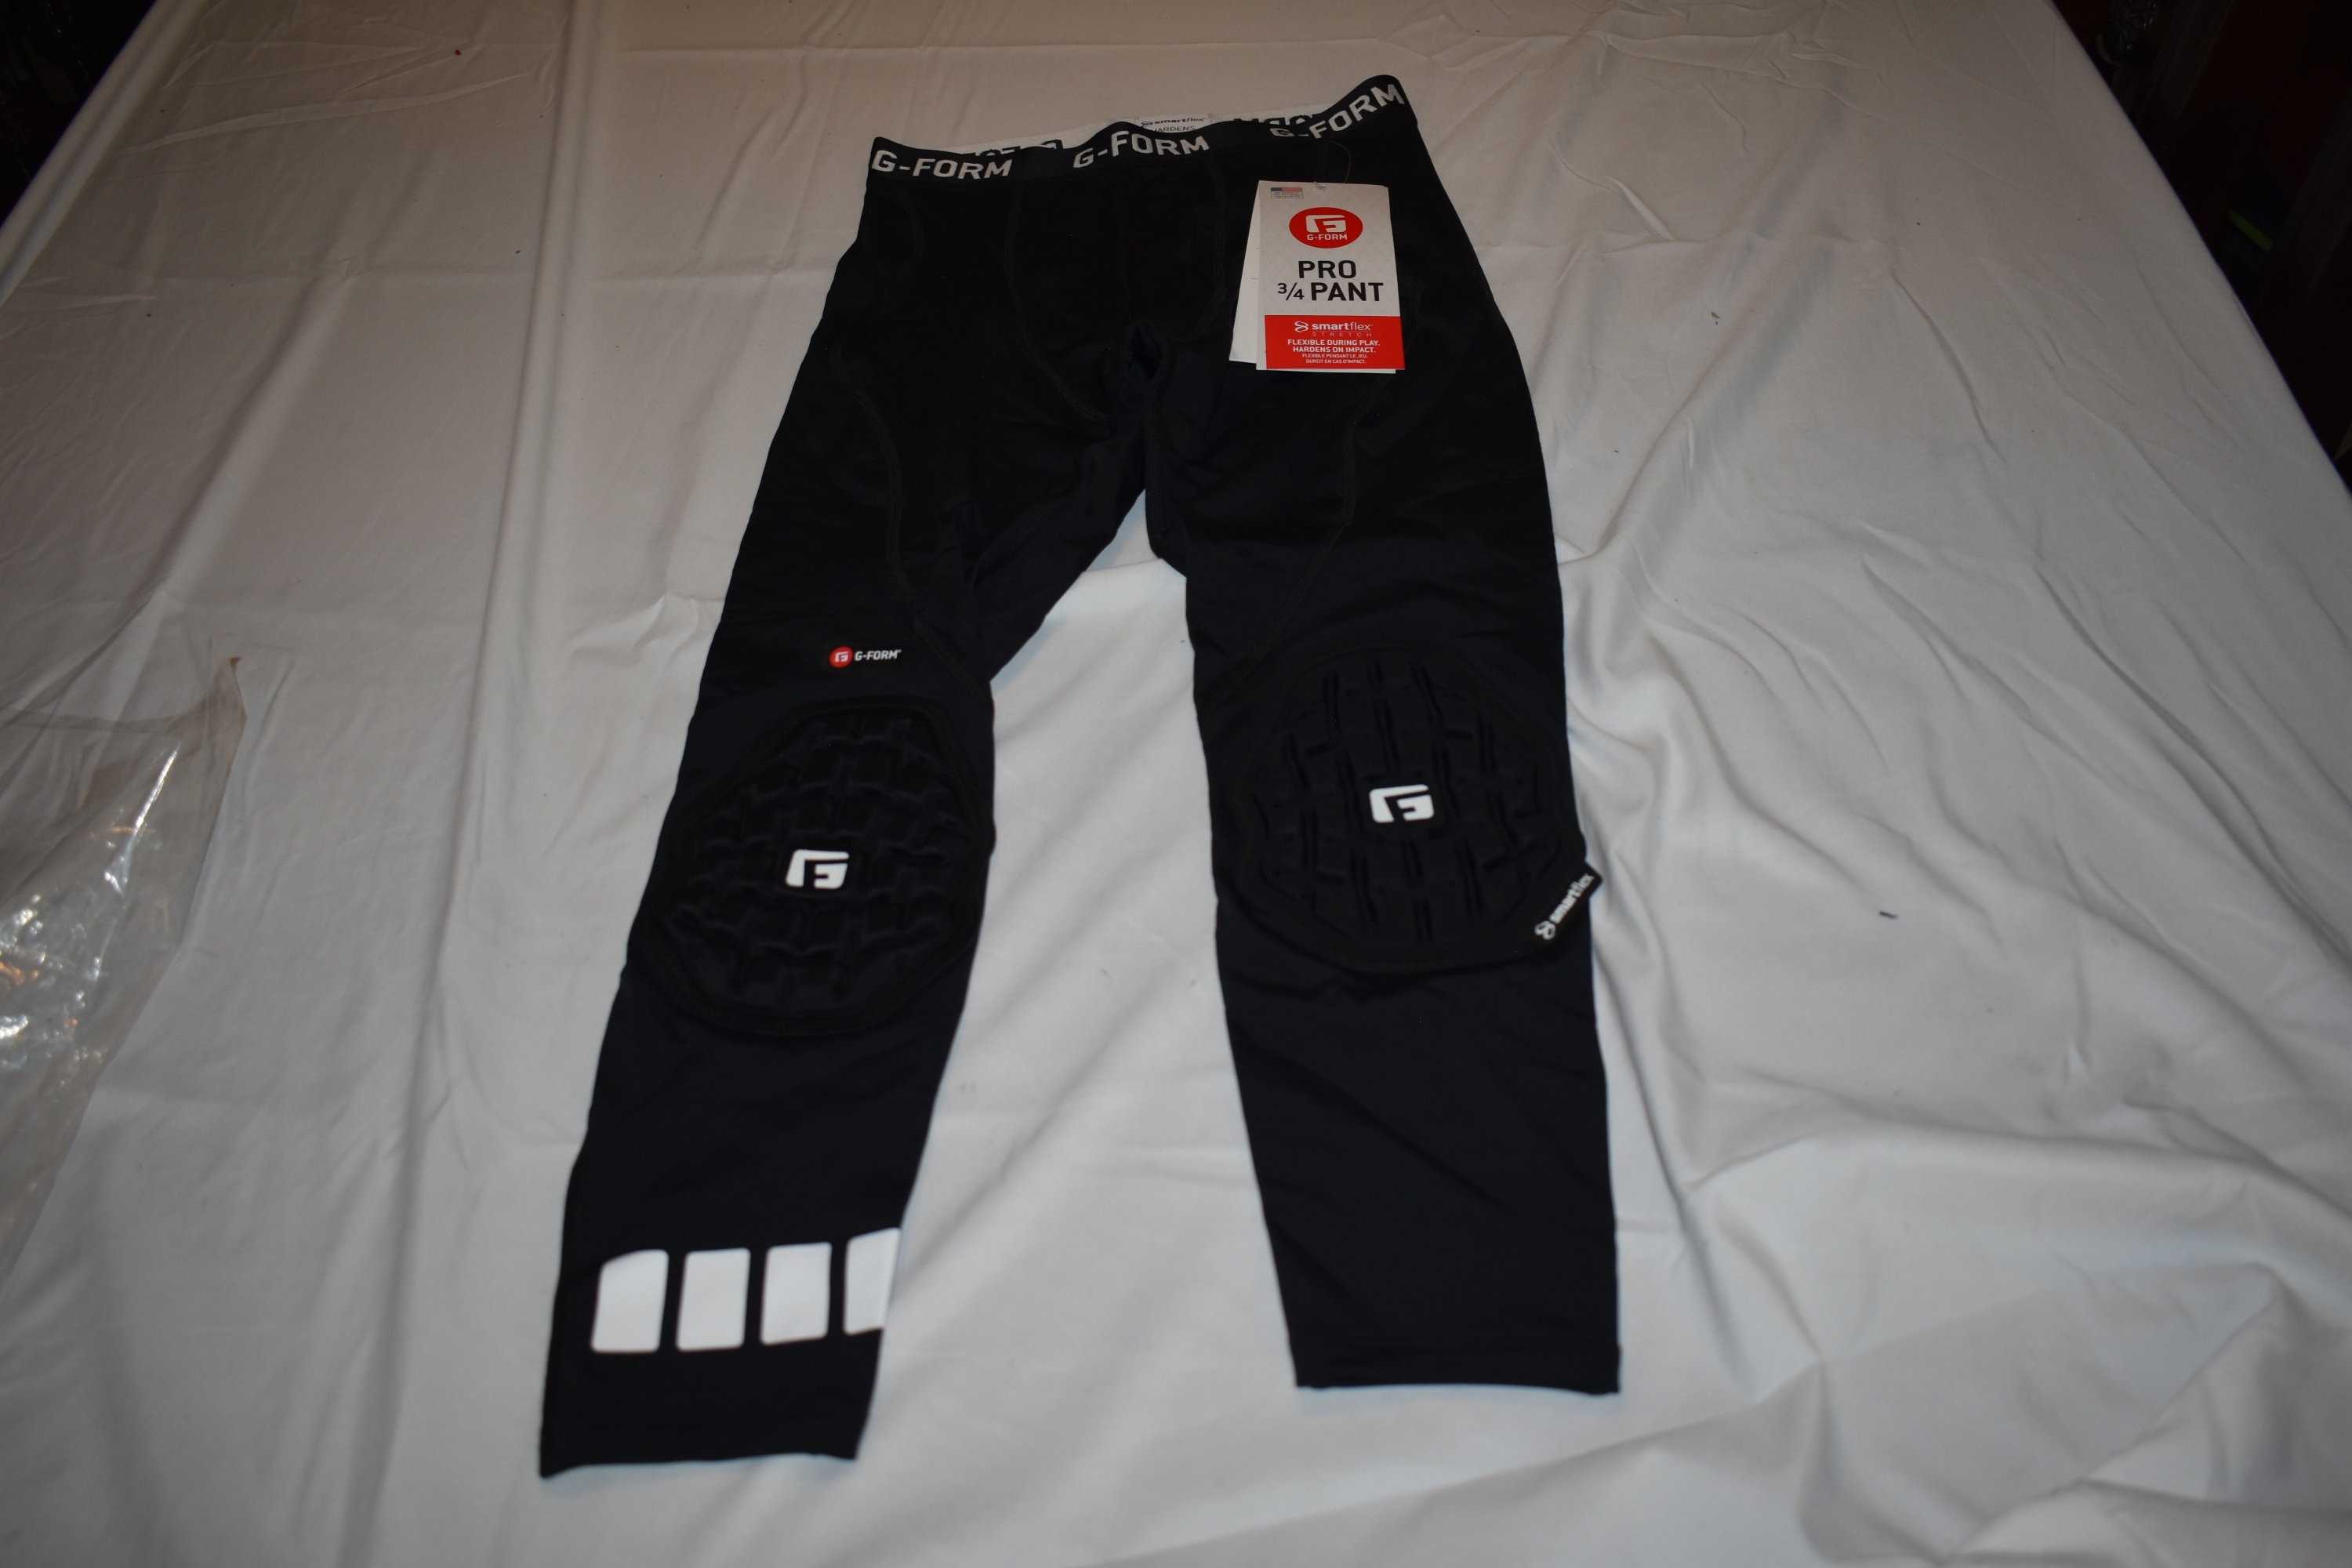 NEW - G-Form Pro Pant Protective Compression Pants, 3/4 Length, 3 Pads, Black, Adult Small